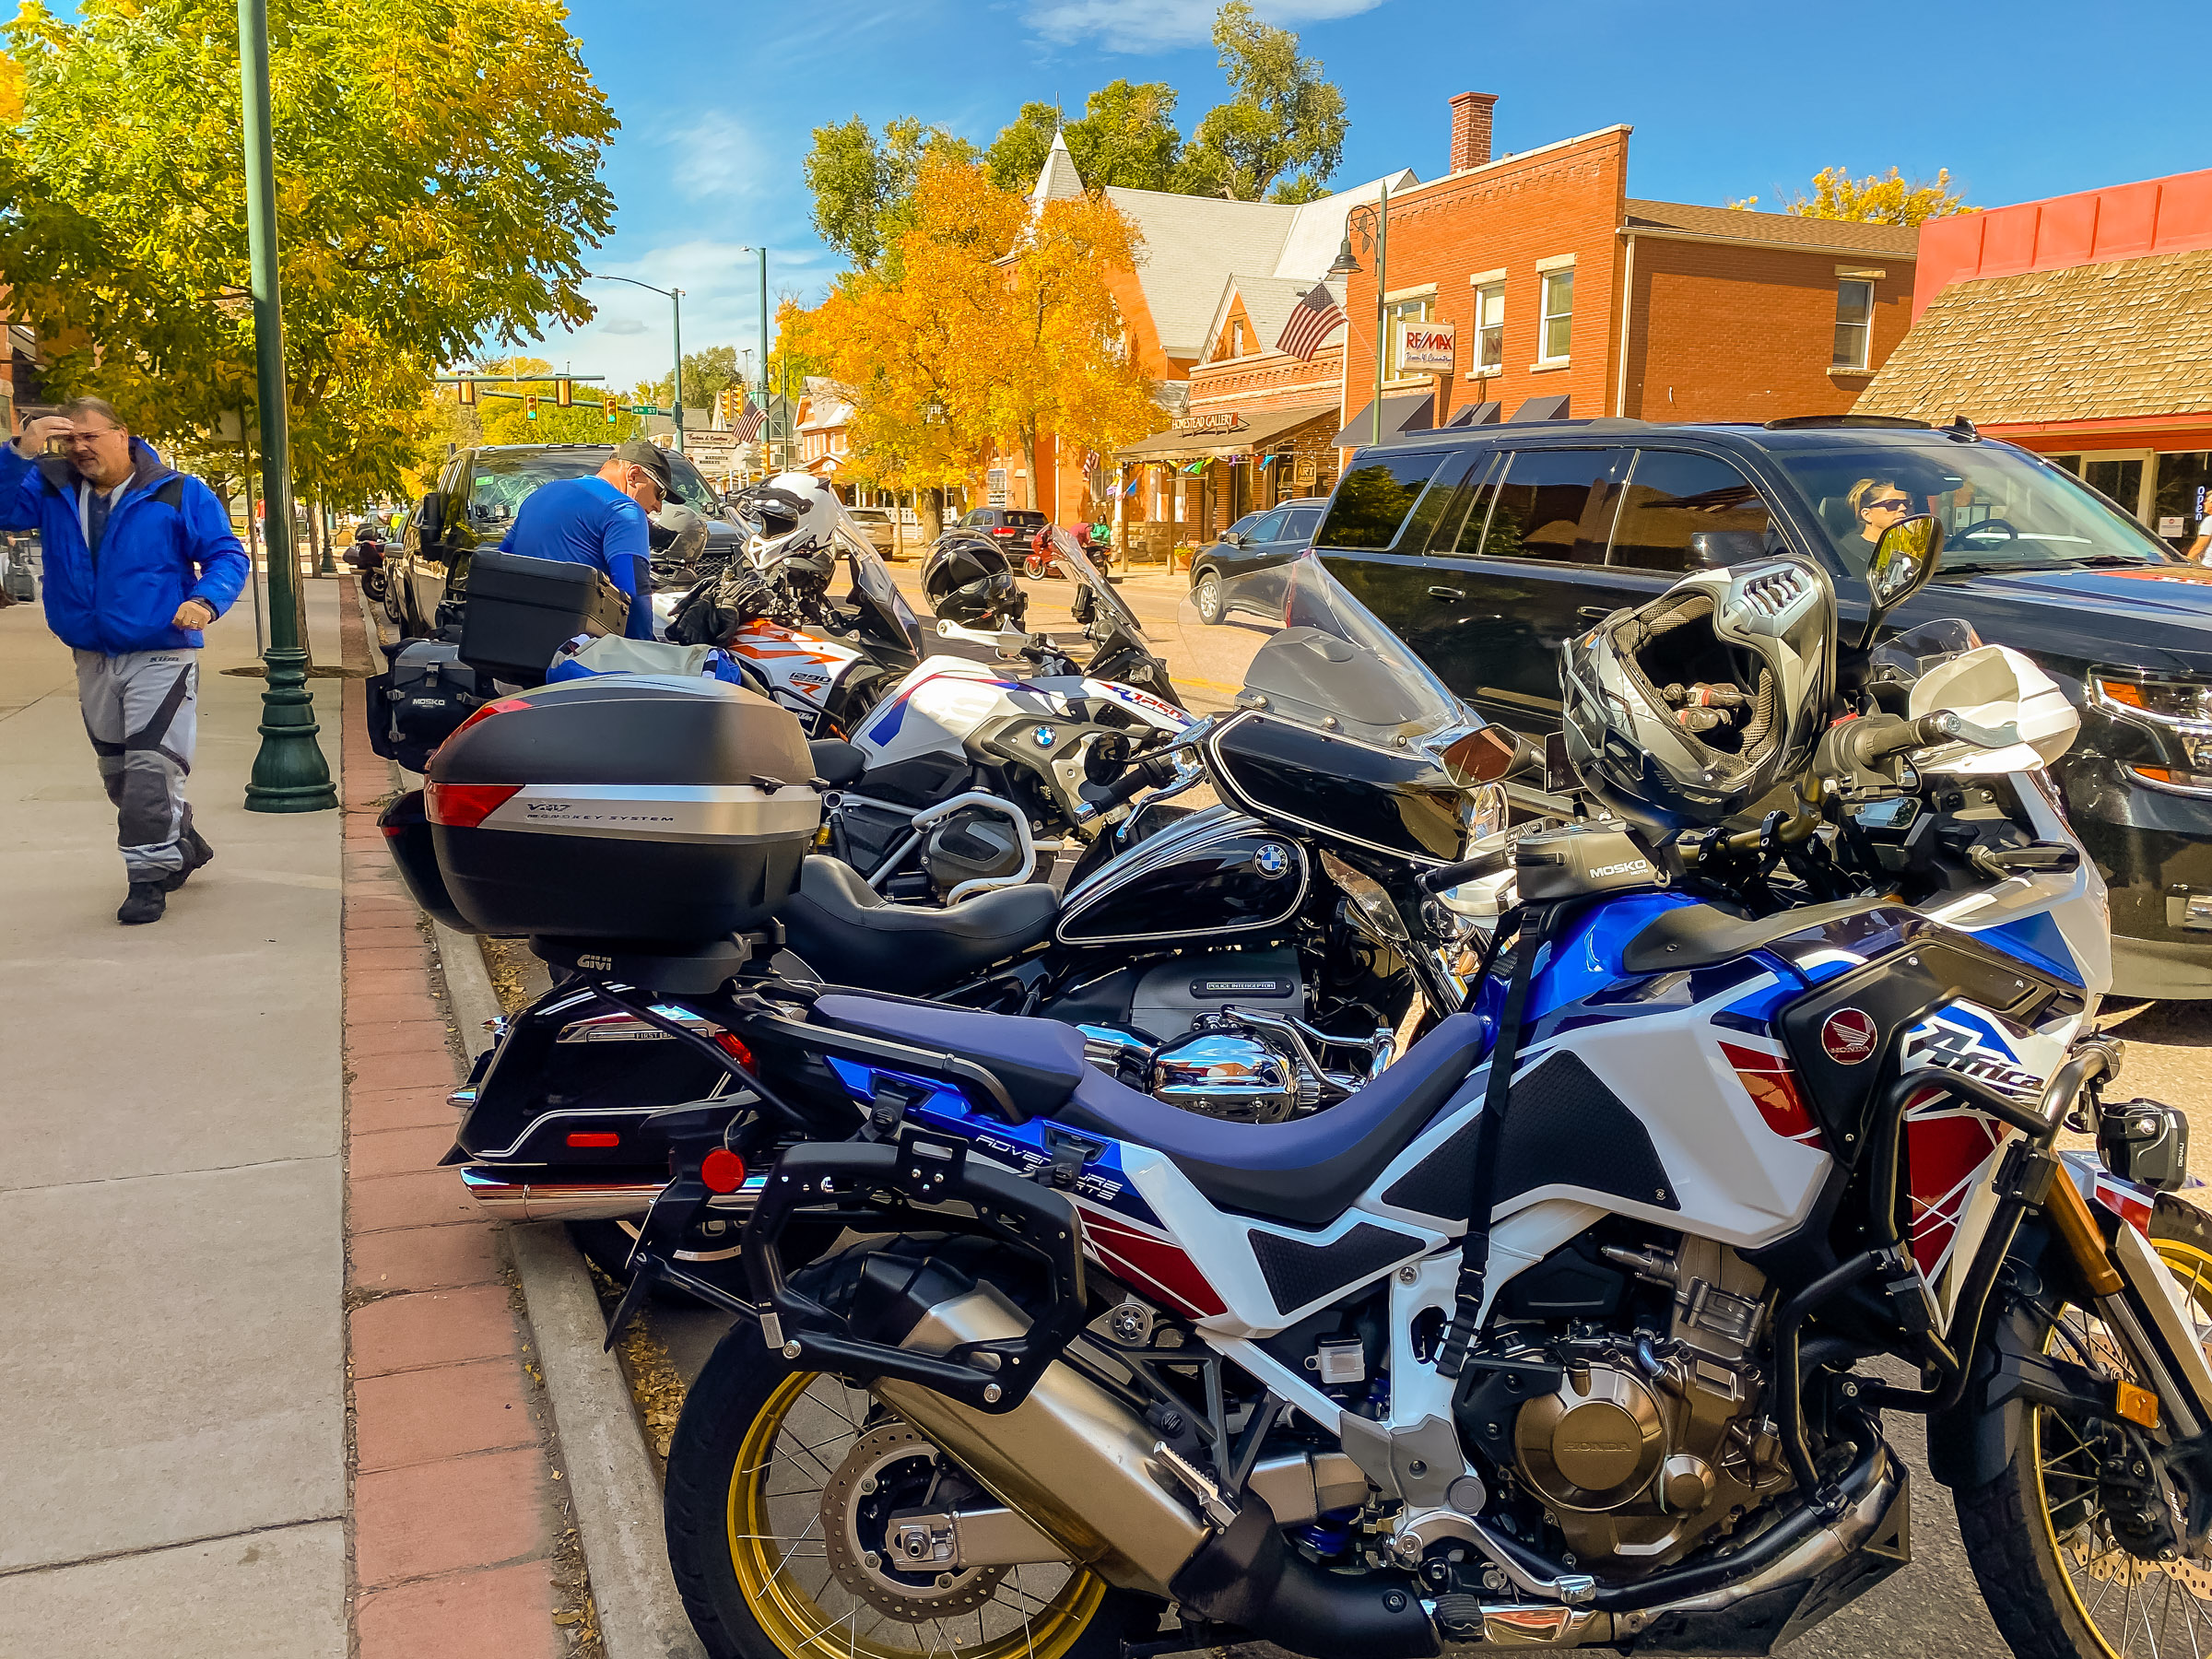 This was an  opportunity for the Southern Morrison members to ride up North and spend time with the Northern Colorado members.